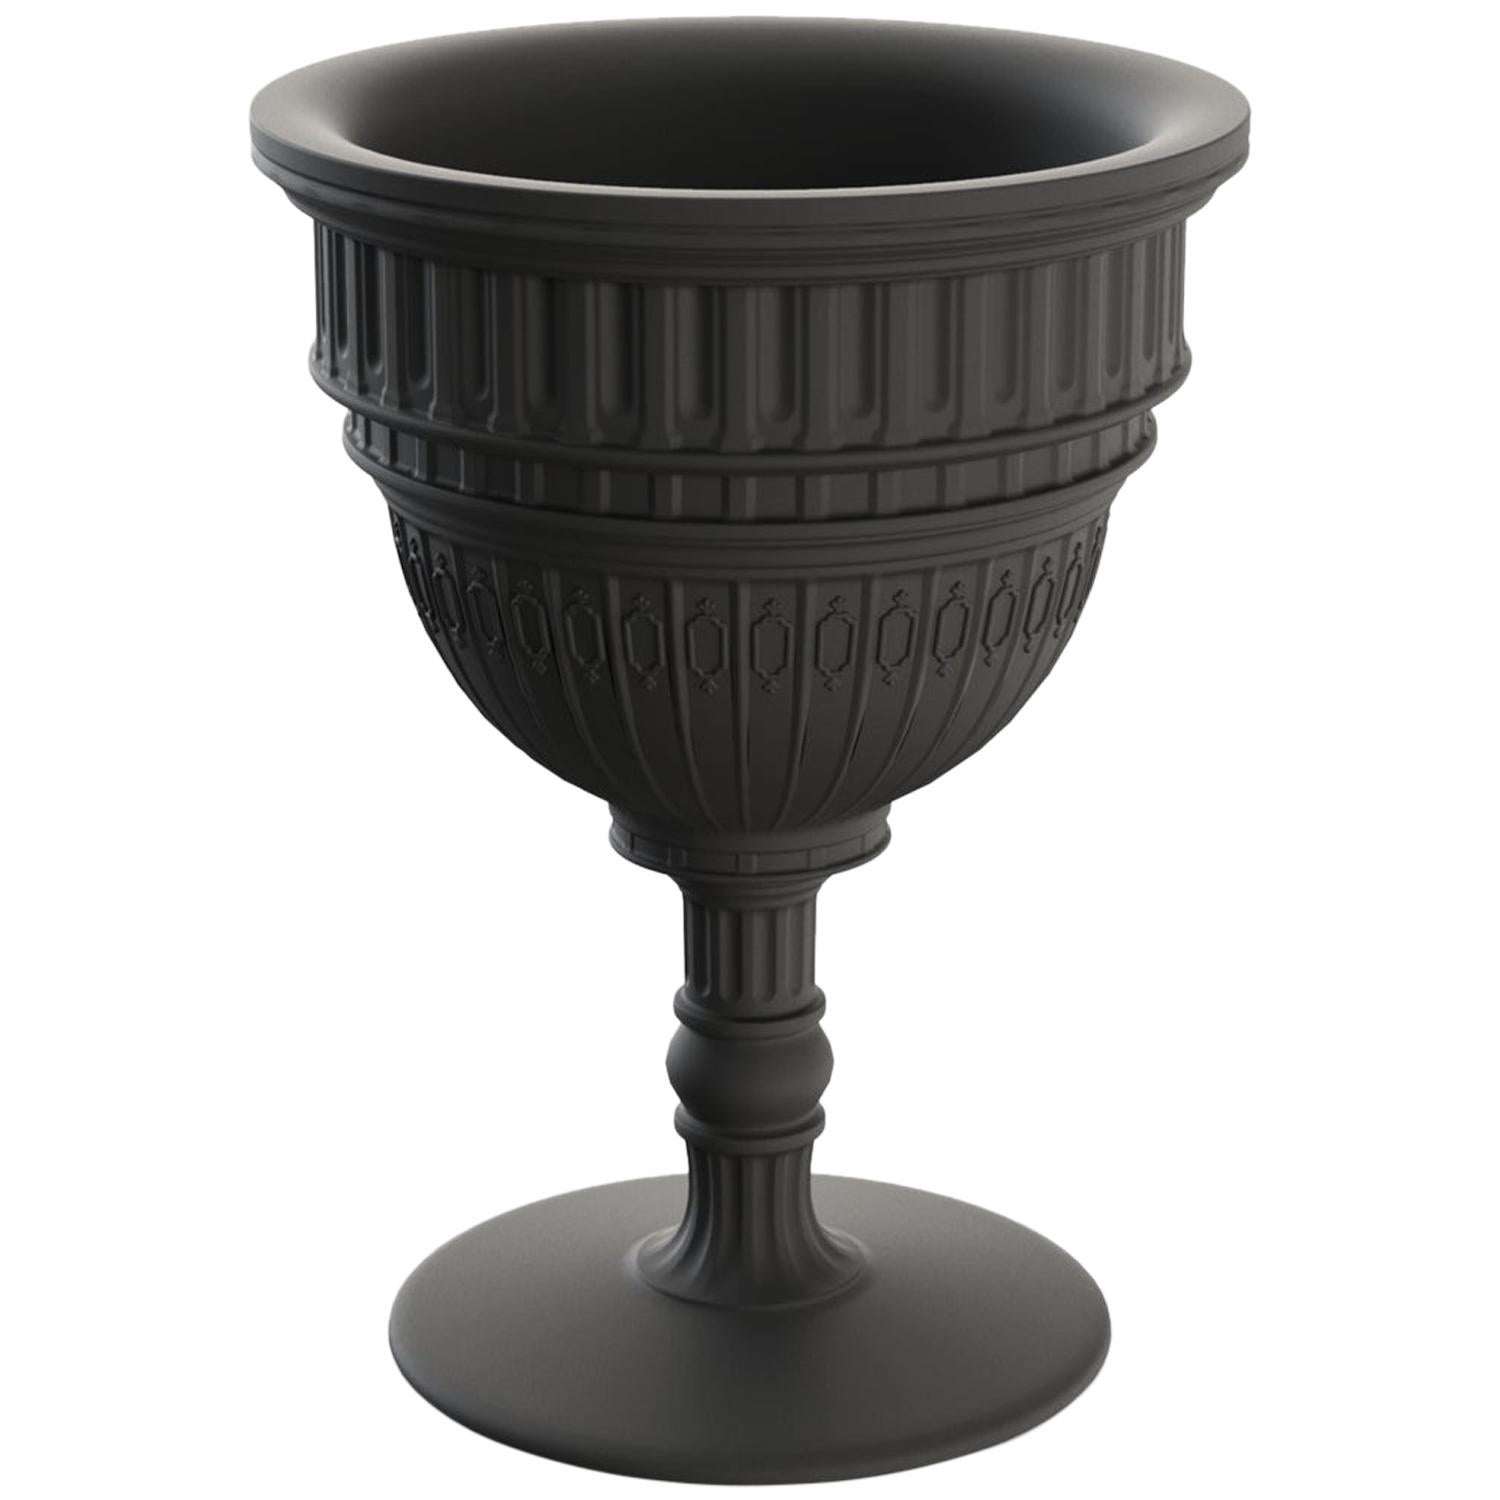 Black Capitol Planter / Champagne Cooler, Designed by Studio Job, Made in Italy